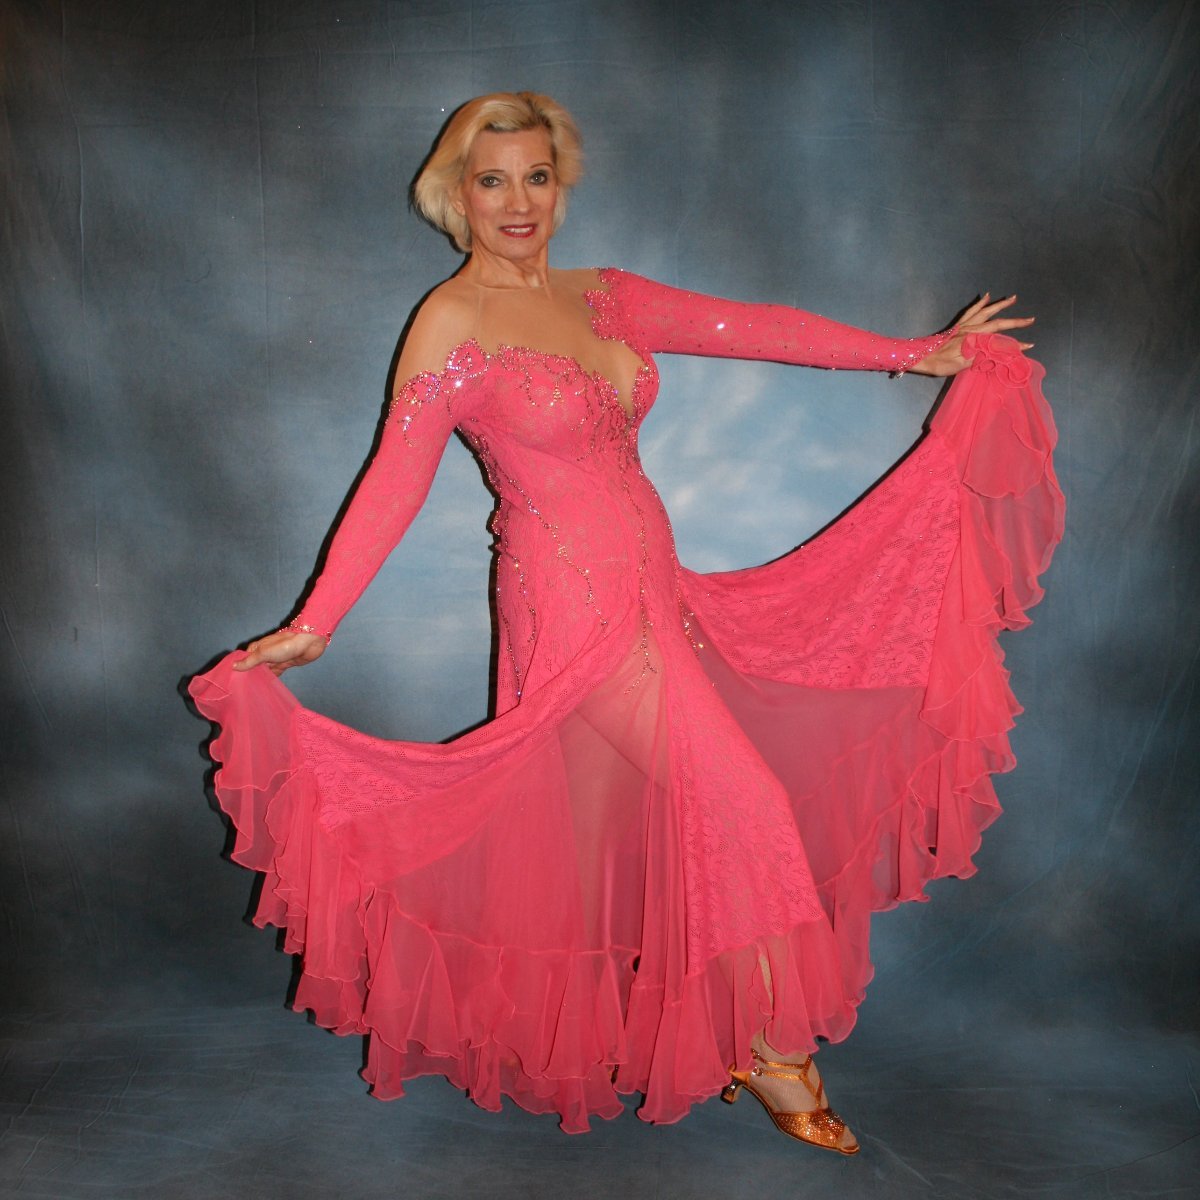 Crystal's Creations side view of Gorgeous salmon pink ballroom dance dress was created from salmon pink stretch lace on nude illusion base with yards & yards of salmon pink chiffon insets & flounces …